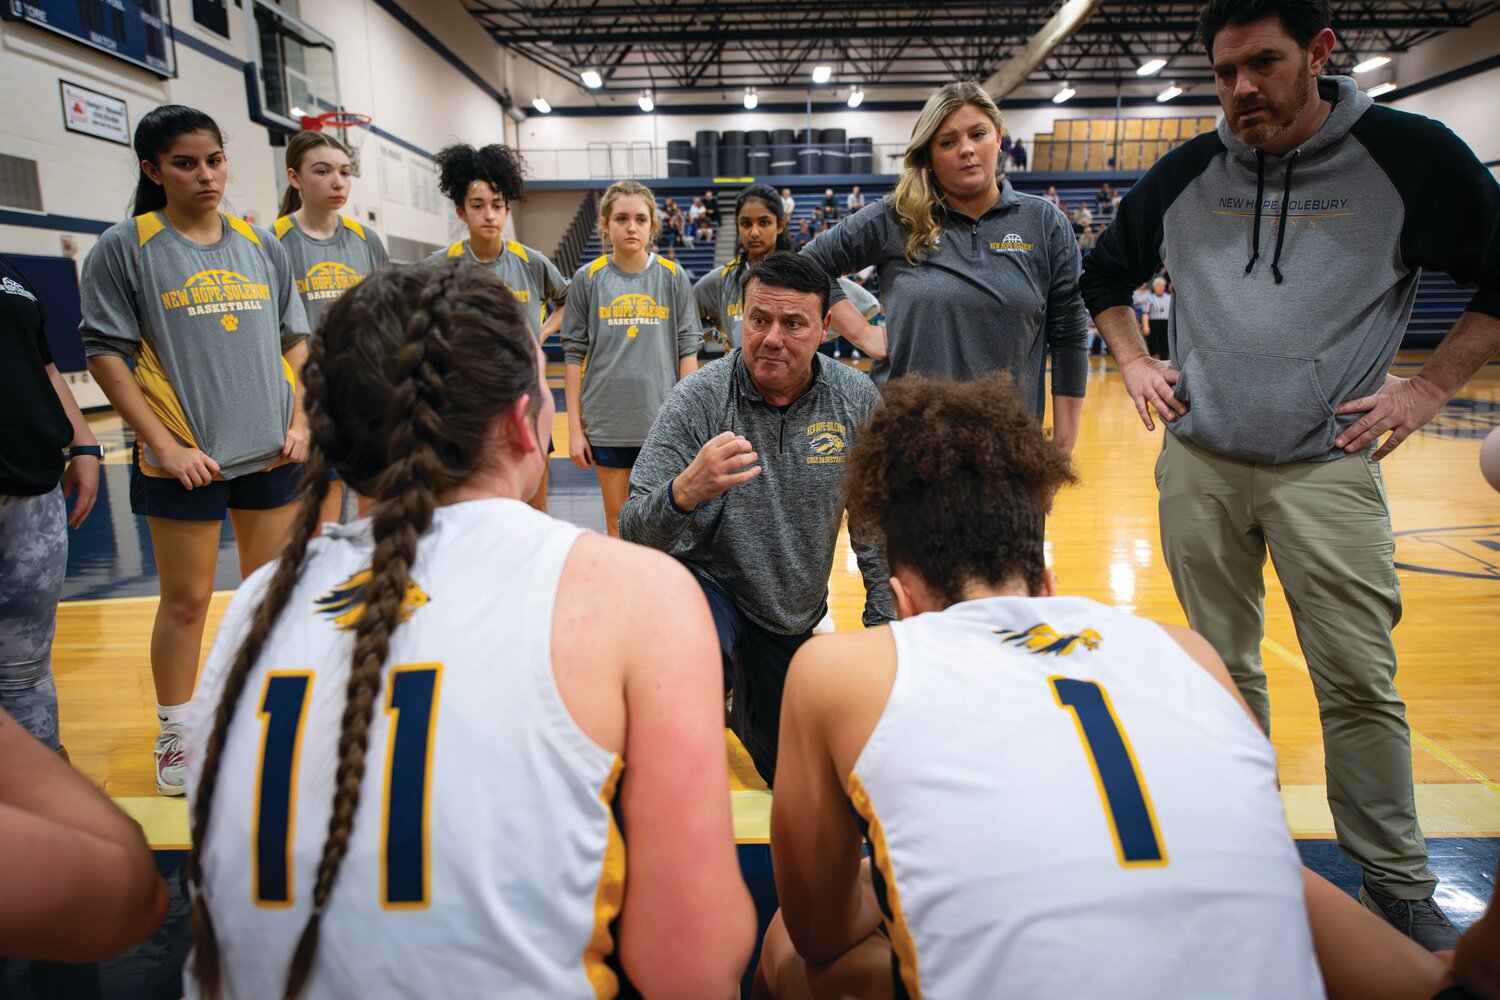 New Hope-Solebury head coach Steve Polinsky stresses defense during a time out early in the first quarter.